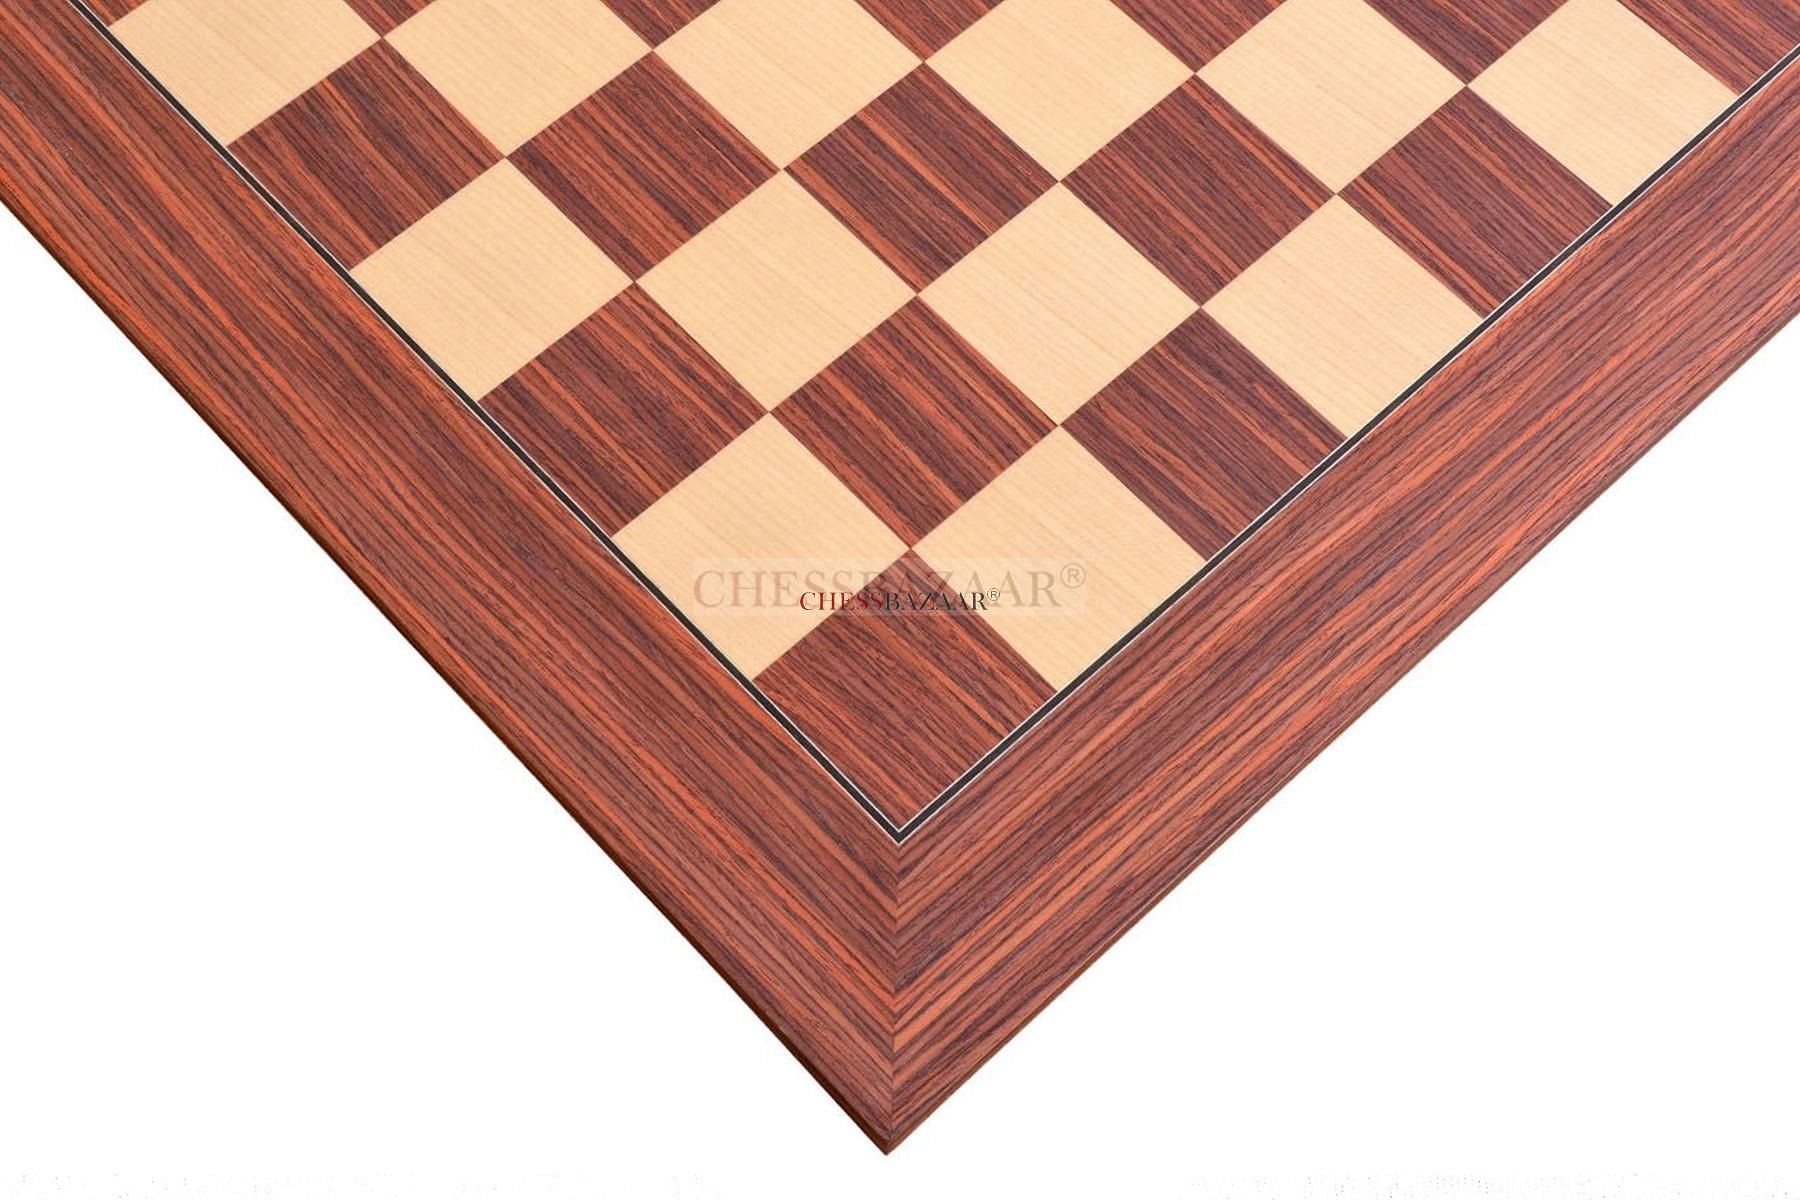 Luxury & Decorative Wooden Chess Set, Walnut Leather Chess Board with  Weighted Chess Pieces, Unique Deluxe Wooden Chess Gifts for Board Game  Lovers